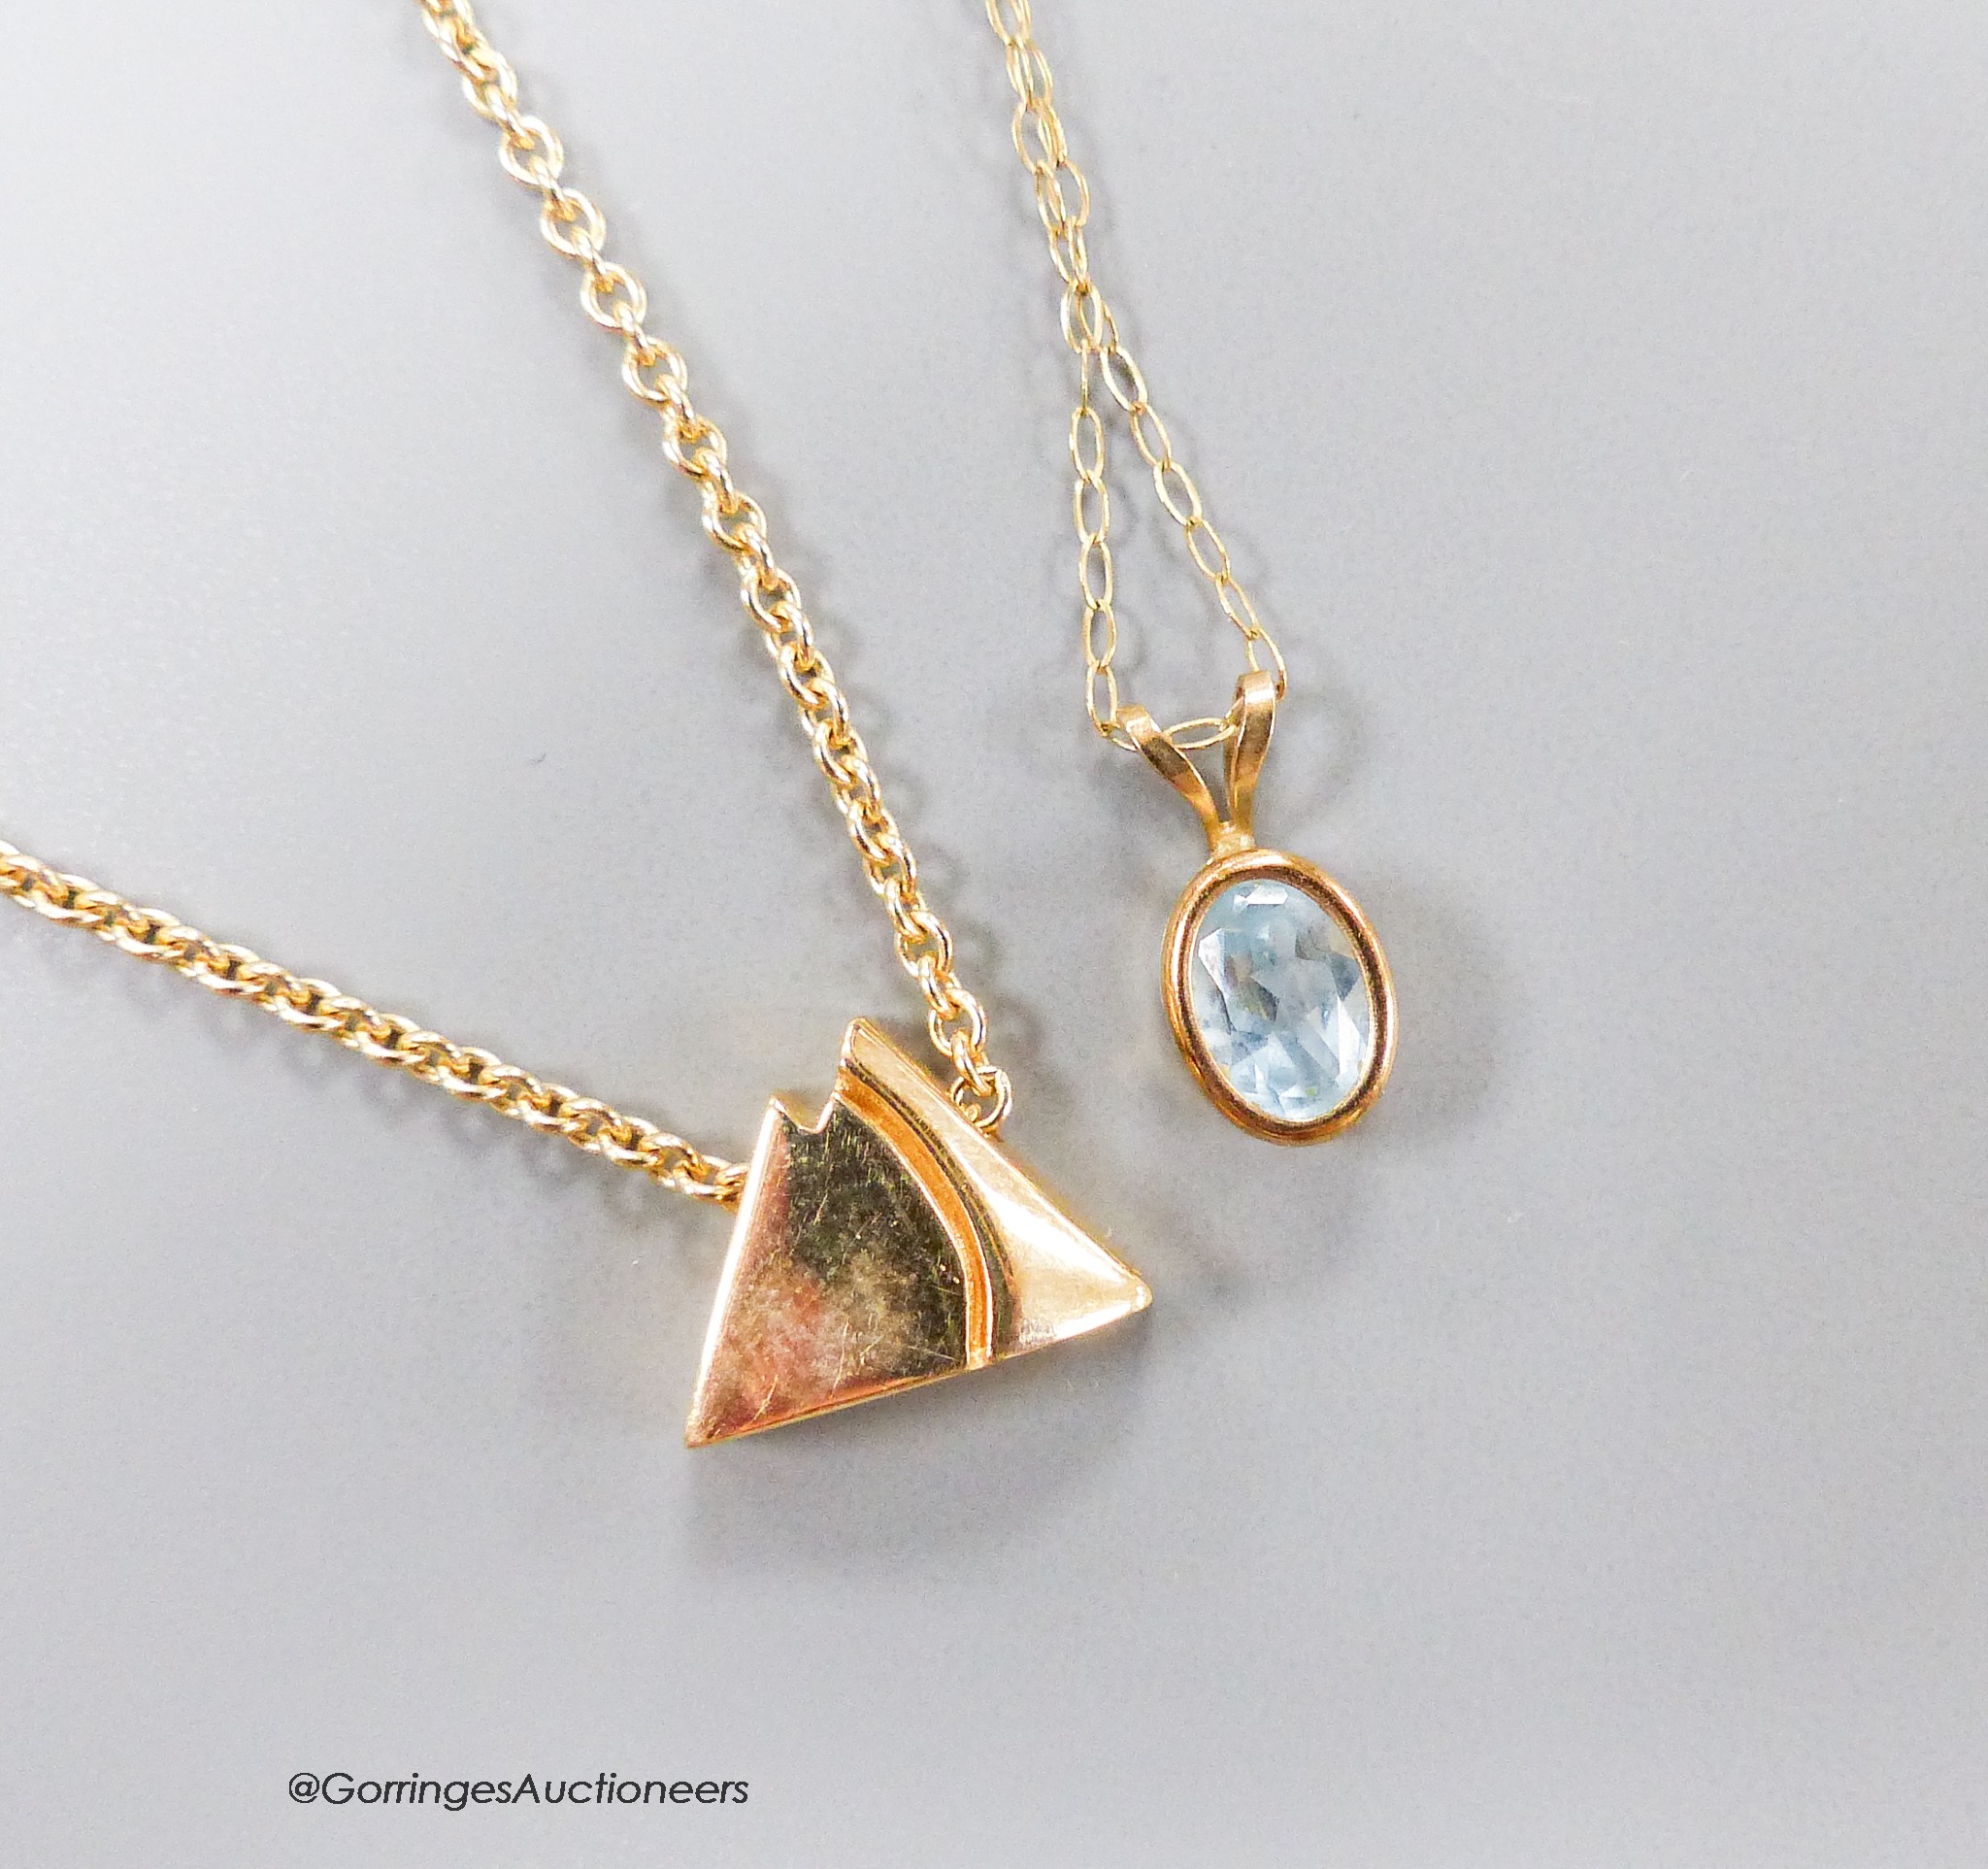 A 14ct gold triangular pendant on 14ct gold chain, gross 5.7 grams, an aquamarine pendant on 9ct fine gold chain and another 9ct gold chain, gross 3.4 grams.